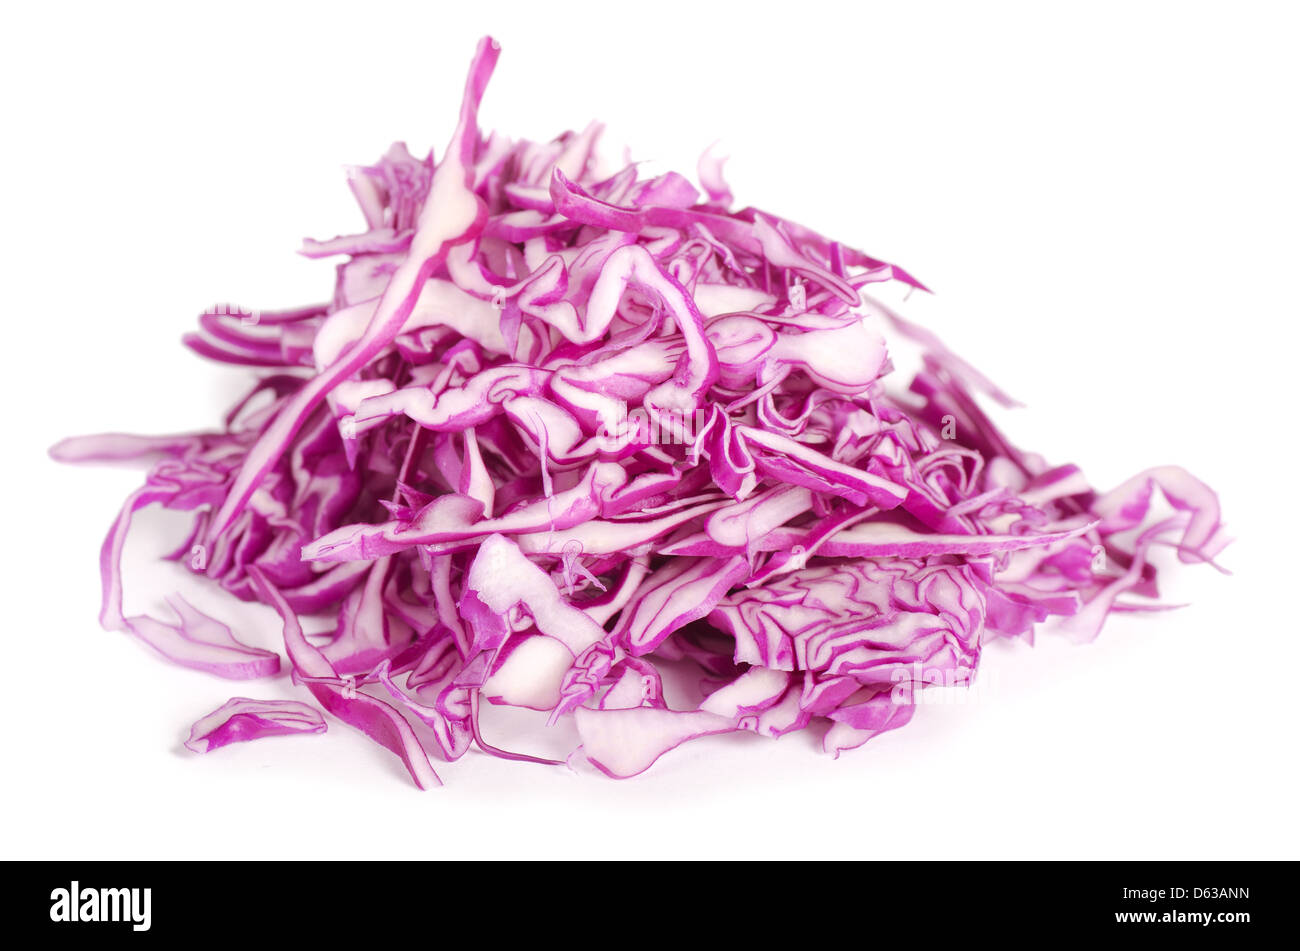 The red cabbage isolated Stock Photo